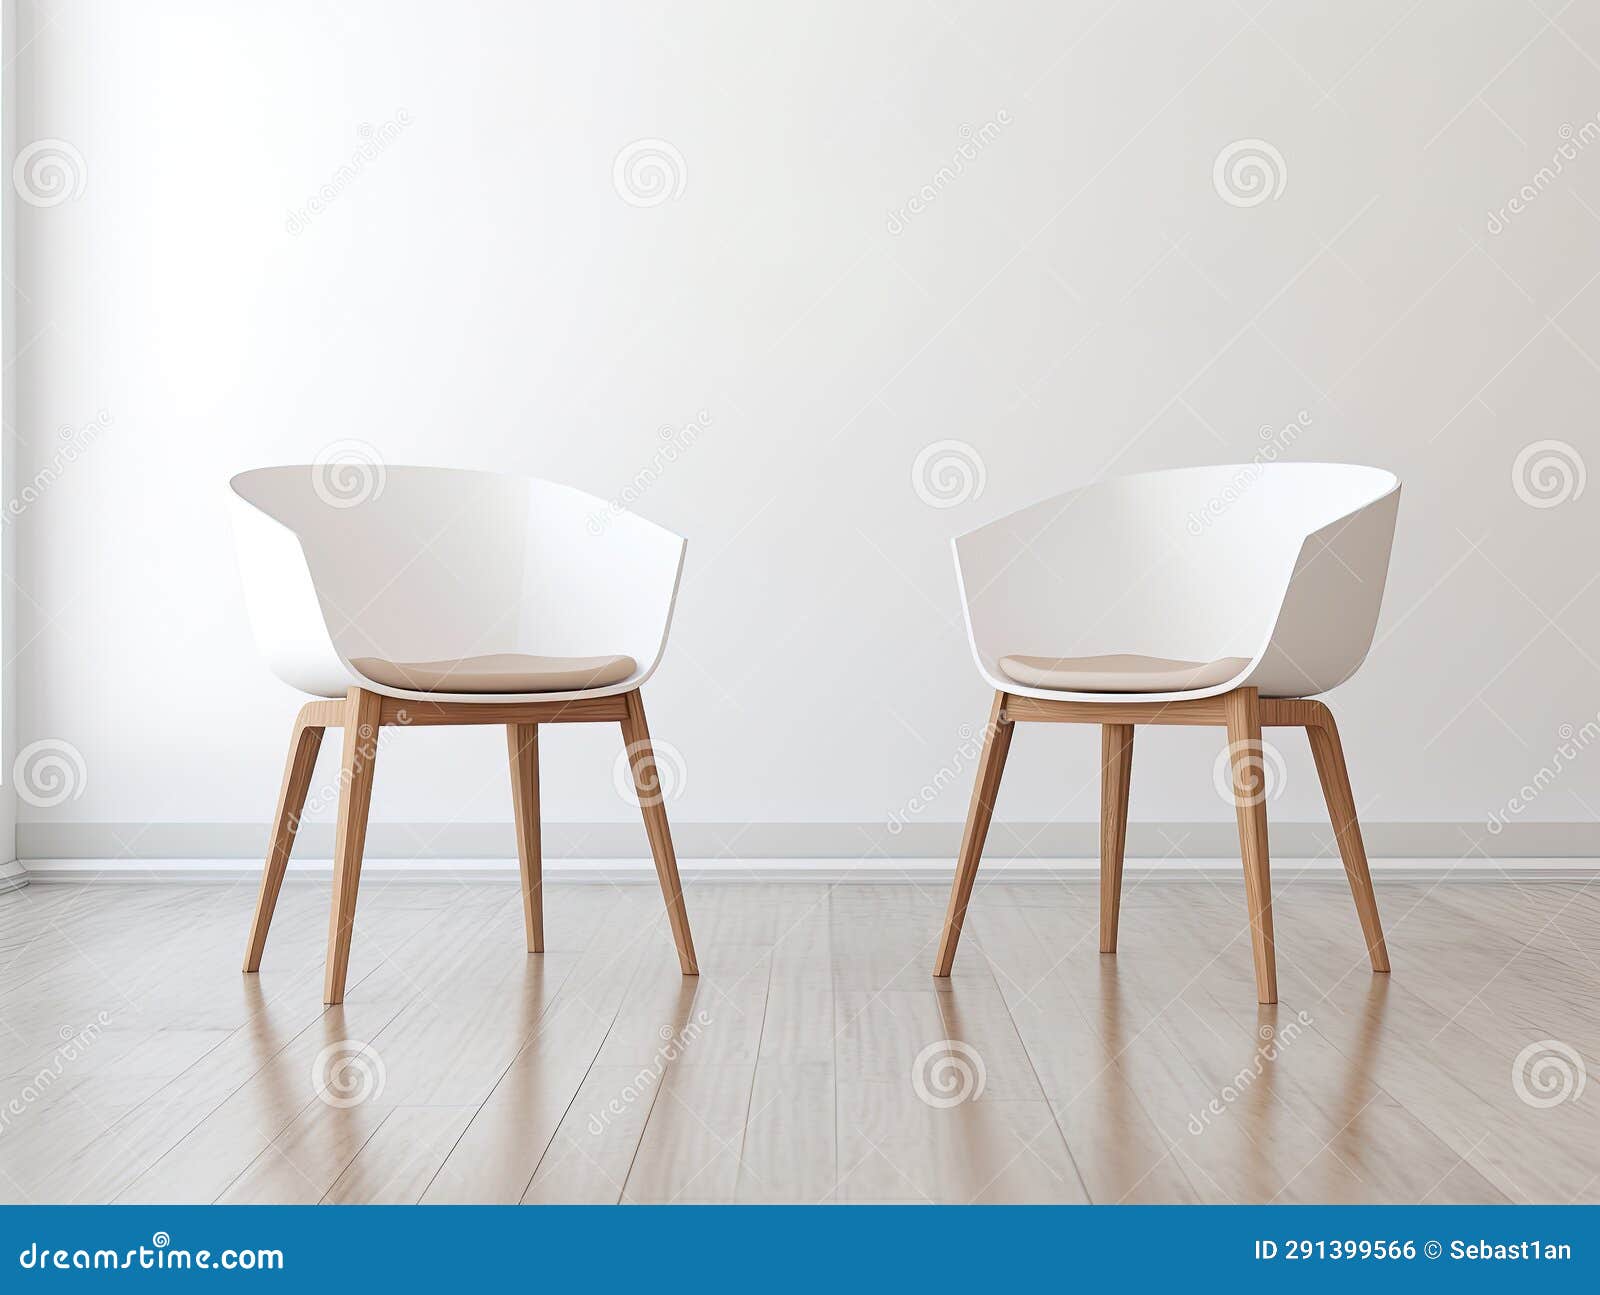 two er chairs elegantly positioned in the middle of a room, interior  sophistication